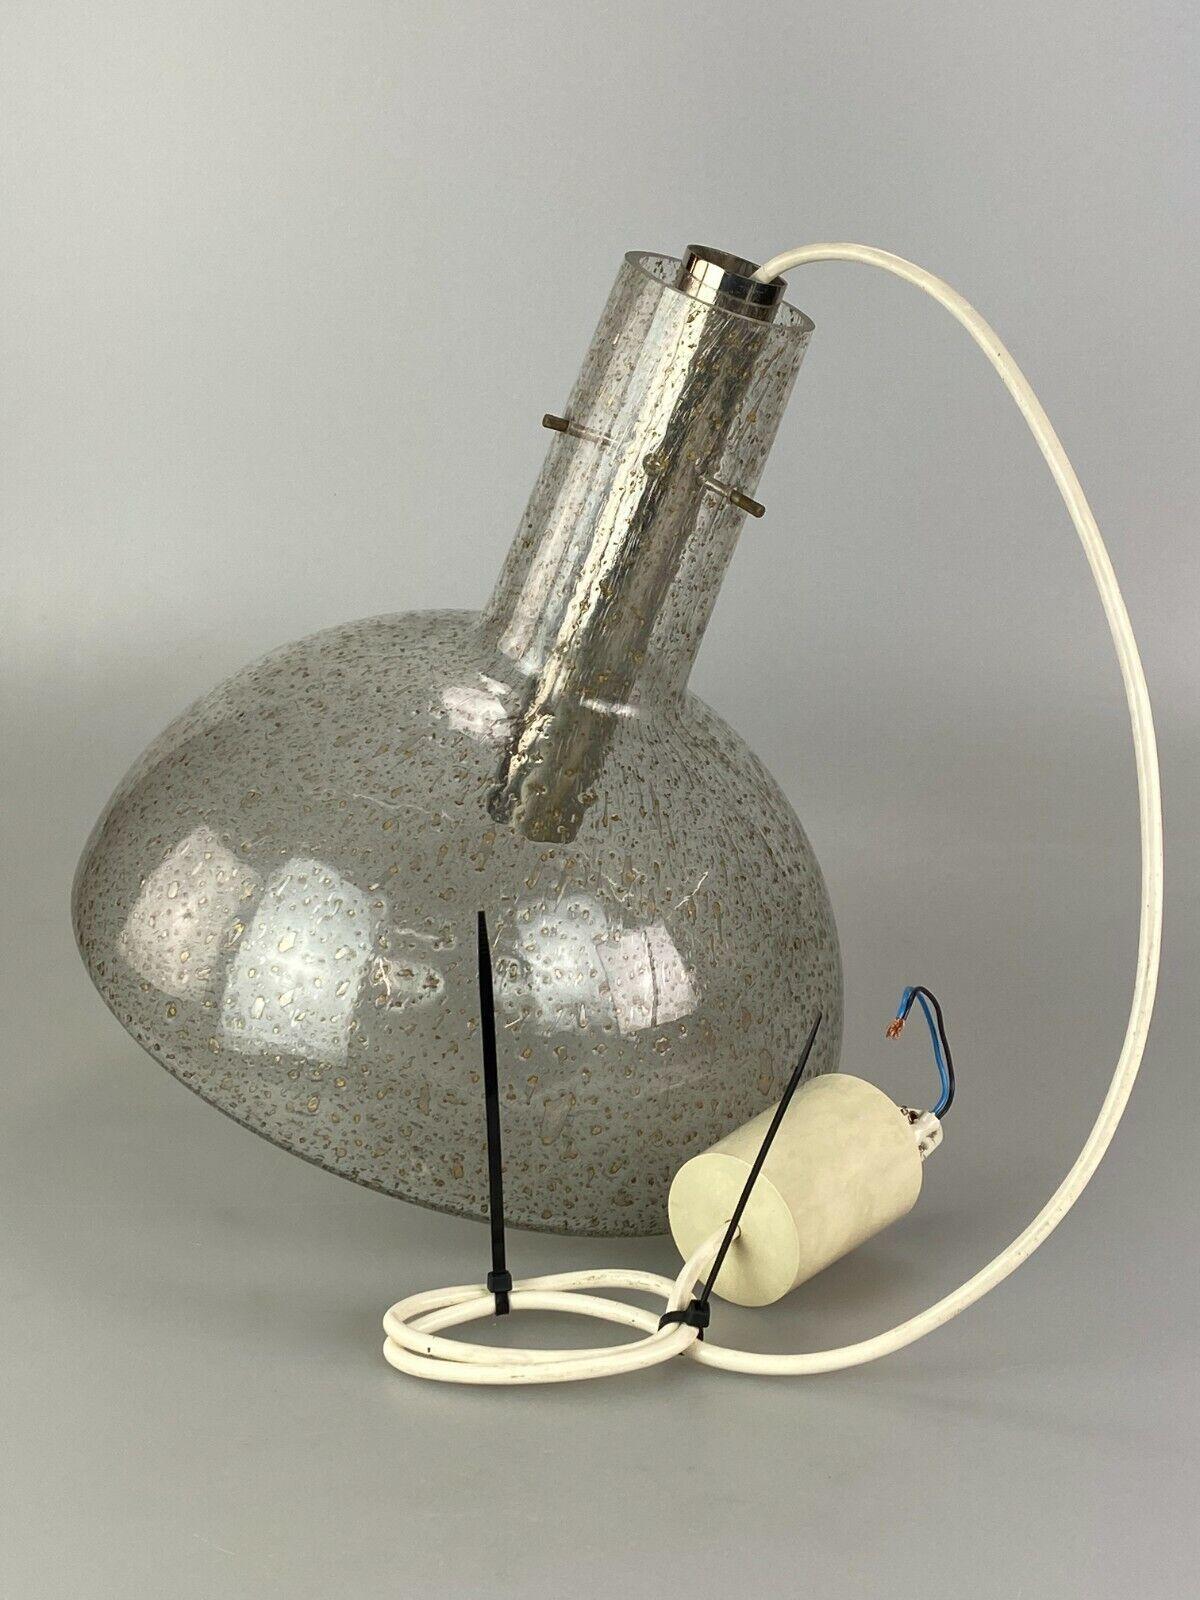 60s 70s Lamp Light Ceiling Lamp Hanging Lamp Temde Glass Space Age Design For Sale 5